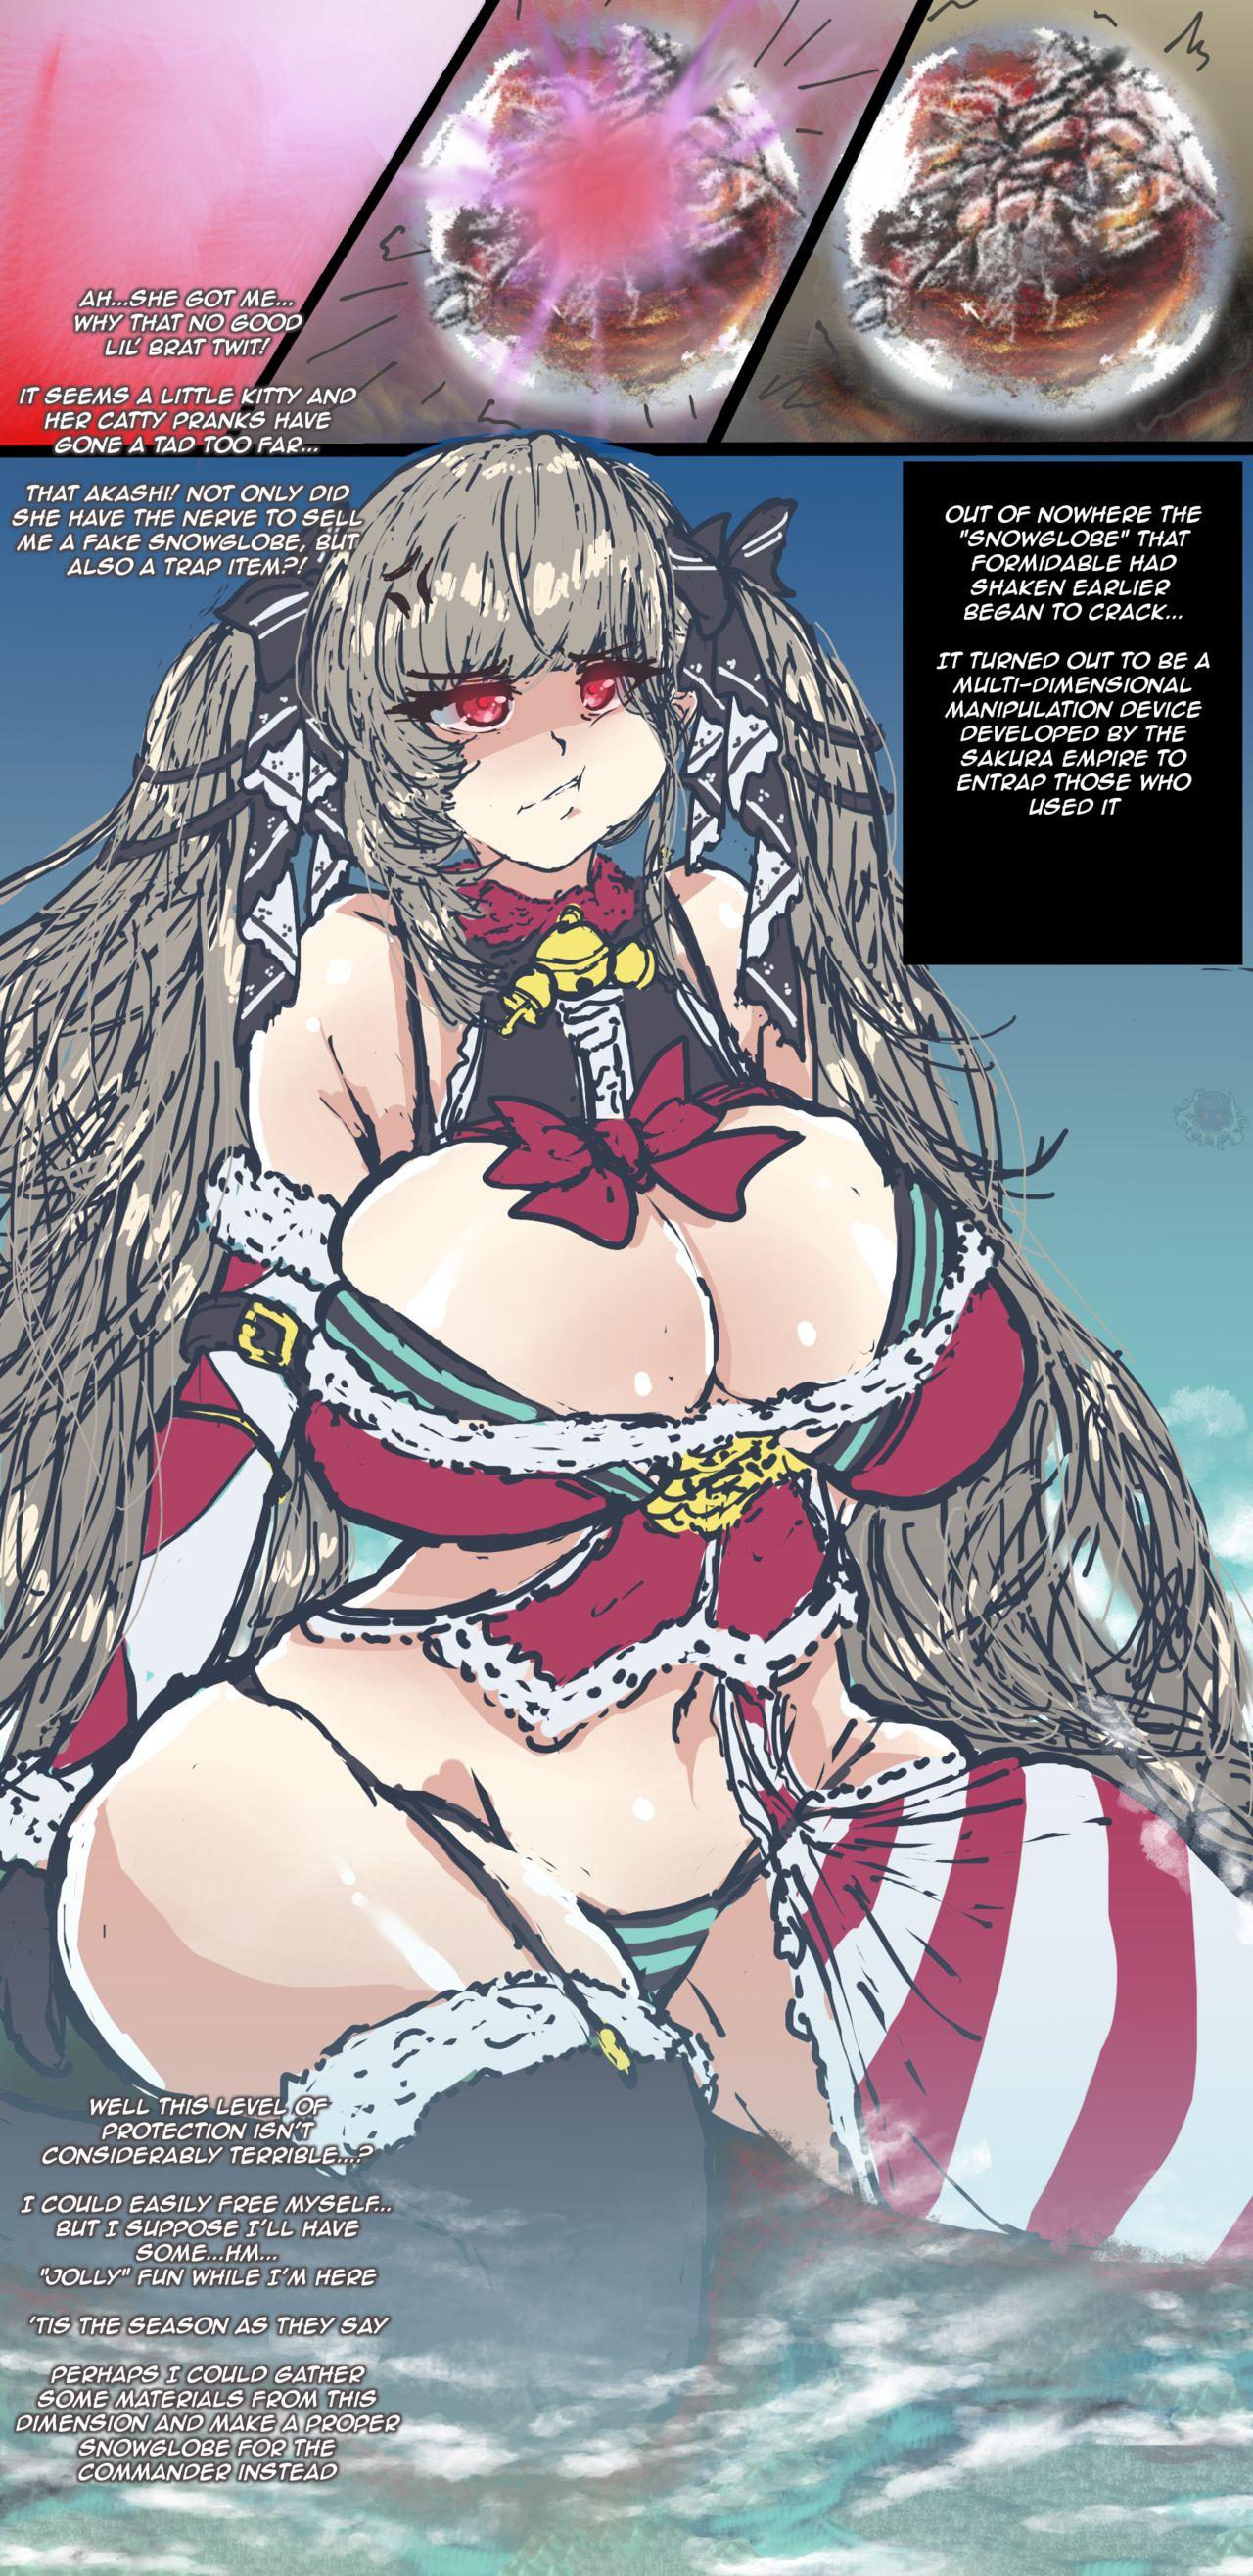 Ghetto Merry Formidable Christmas - Azur lane With - Page 4